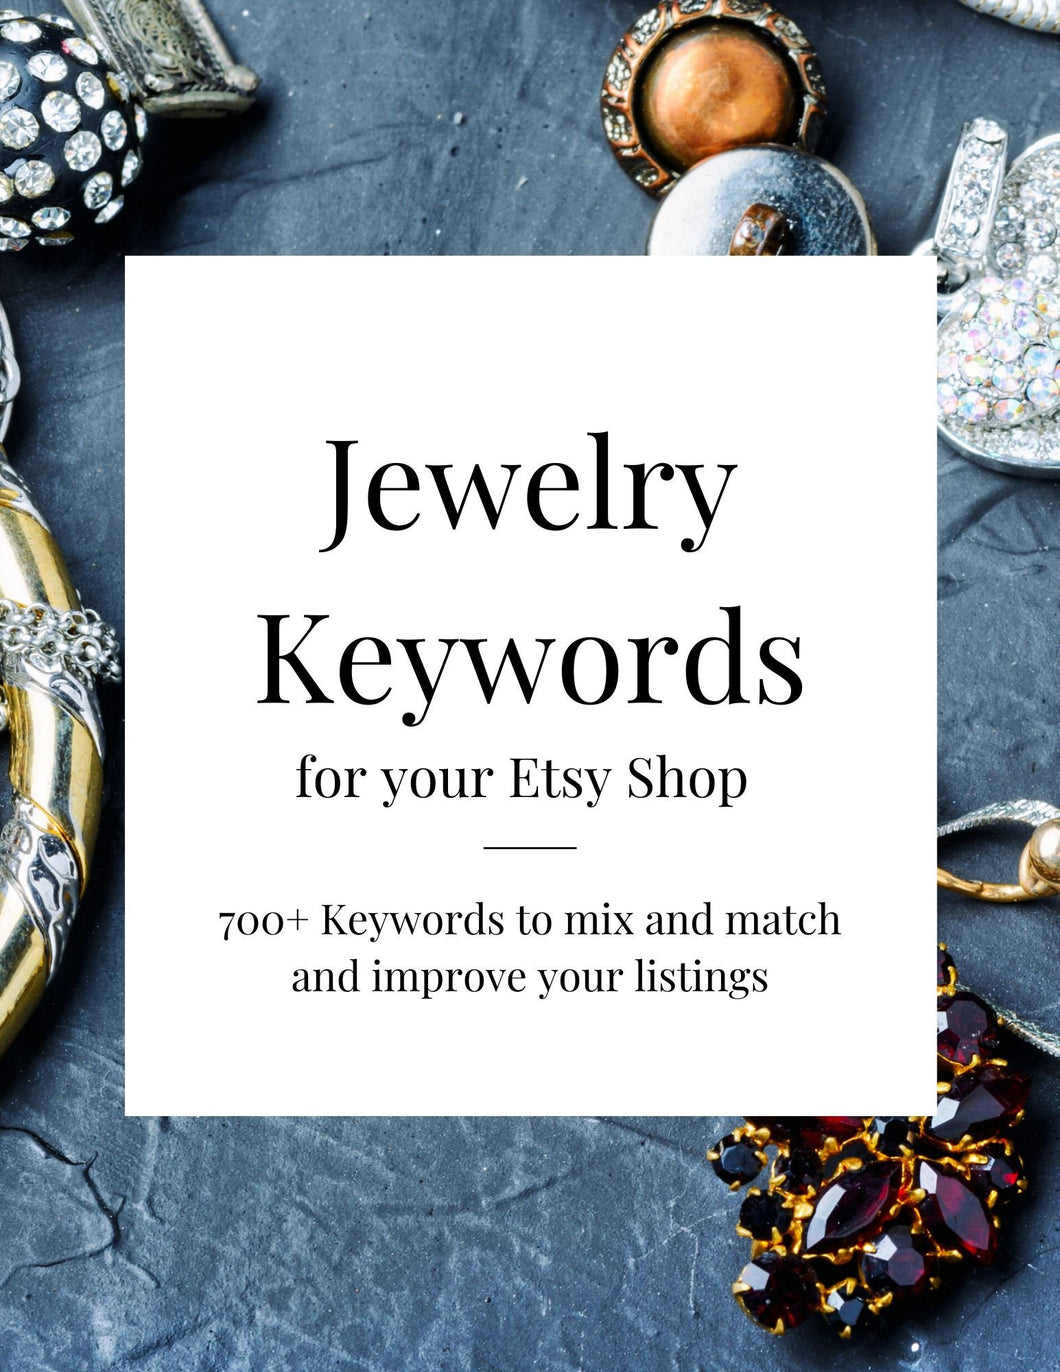 Jewelry Keywords for Etsy Listings, SEO Keywords, Etsy Help, Etsy SEO, Etsy Keywords